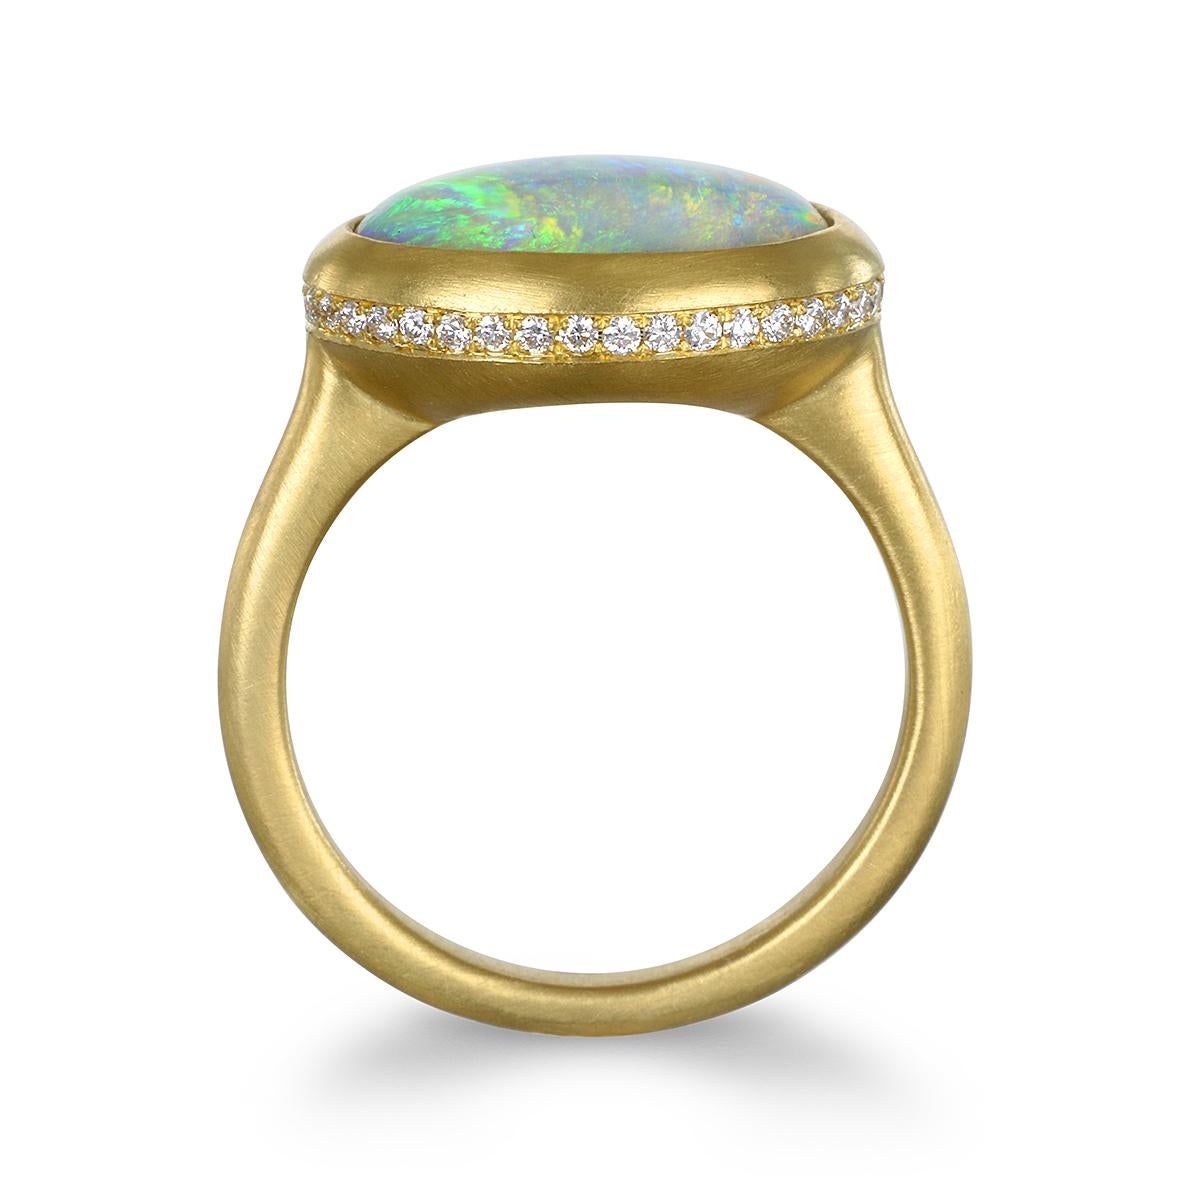 Faye Kim's one of a kind striking Crystal Opal from Corcoran Field of Australia is set in 18k gold* with micro pave diamonds set into the bezel. The ring is a statement piece, and can be worn for any and every occasion.

*In Faye Kim's signature 18k